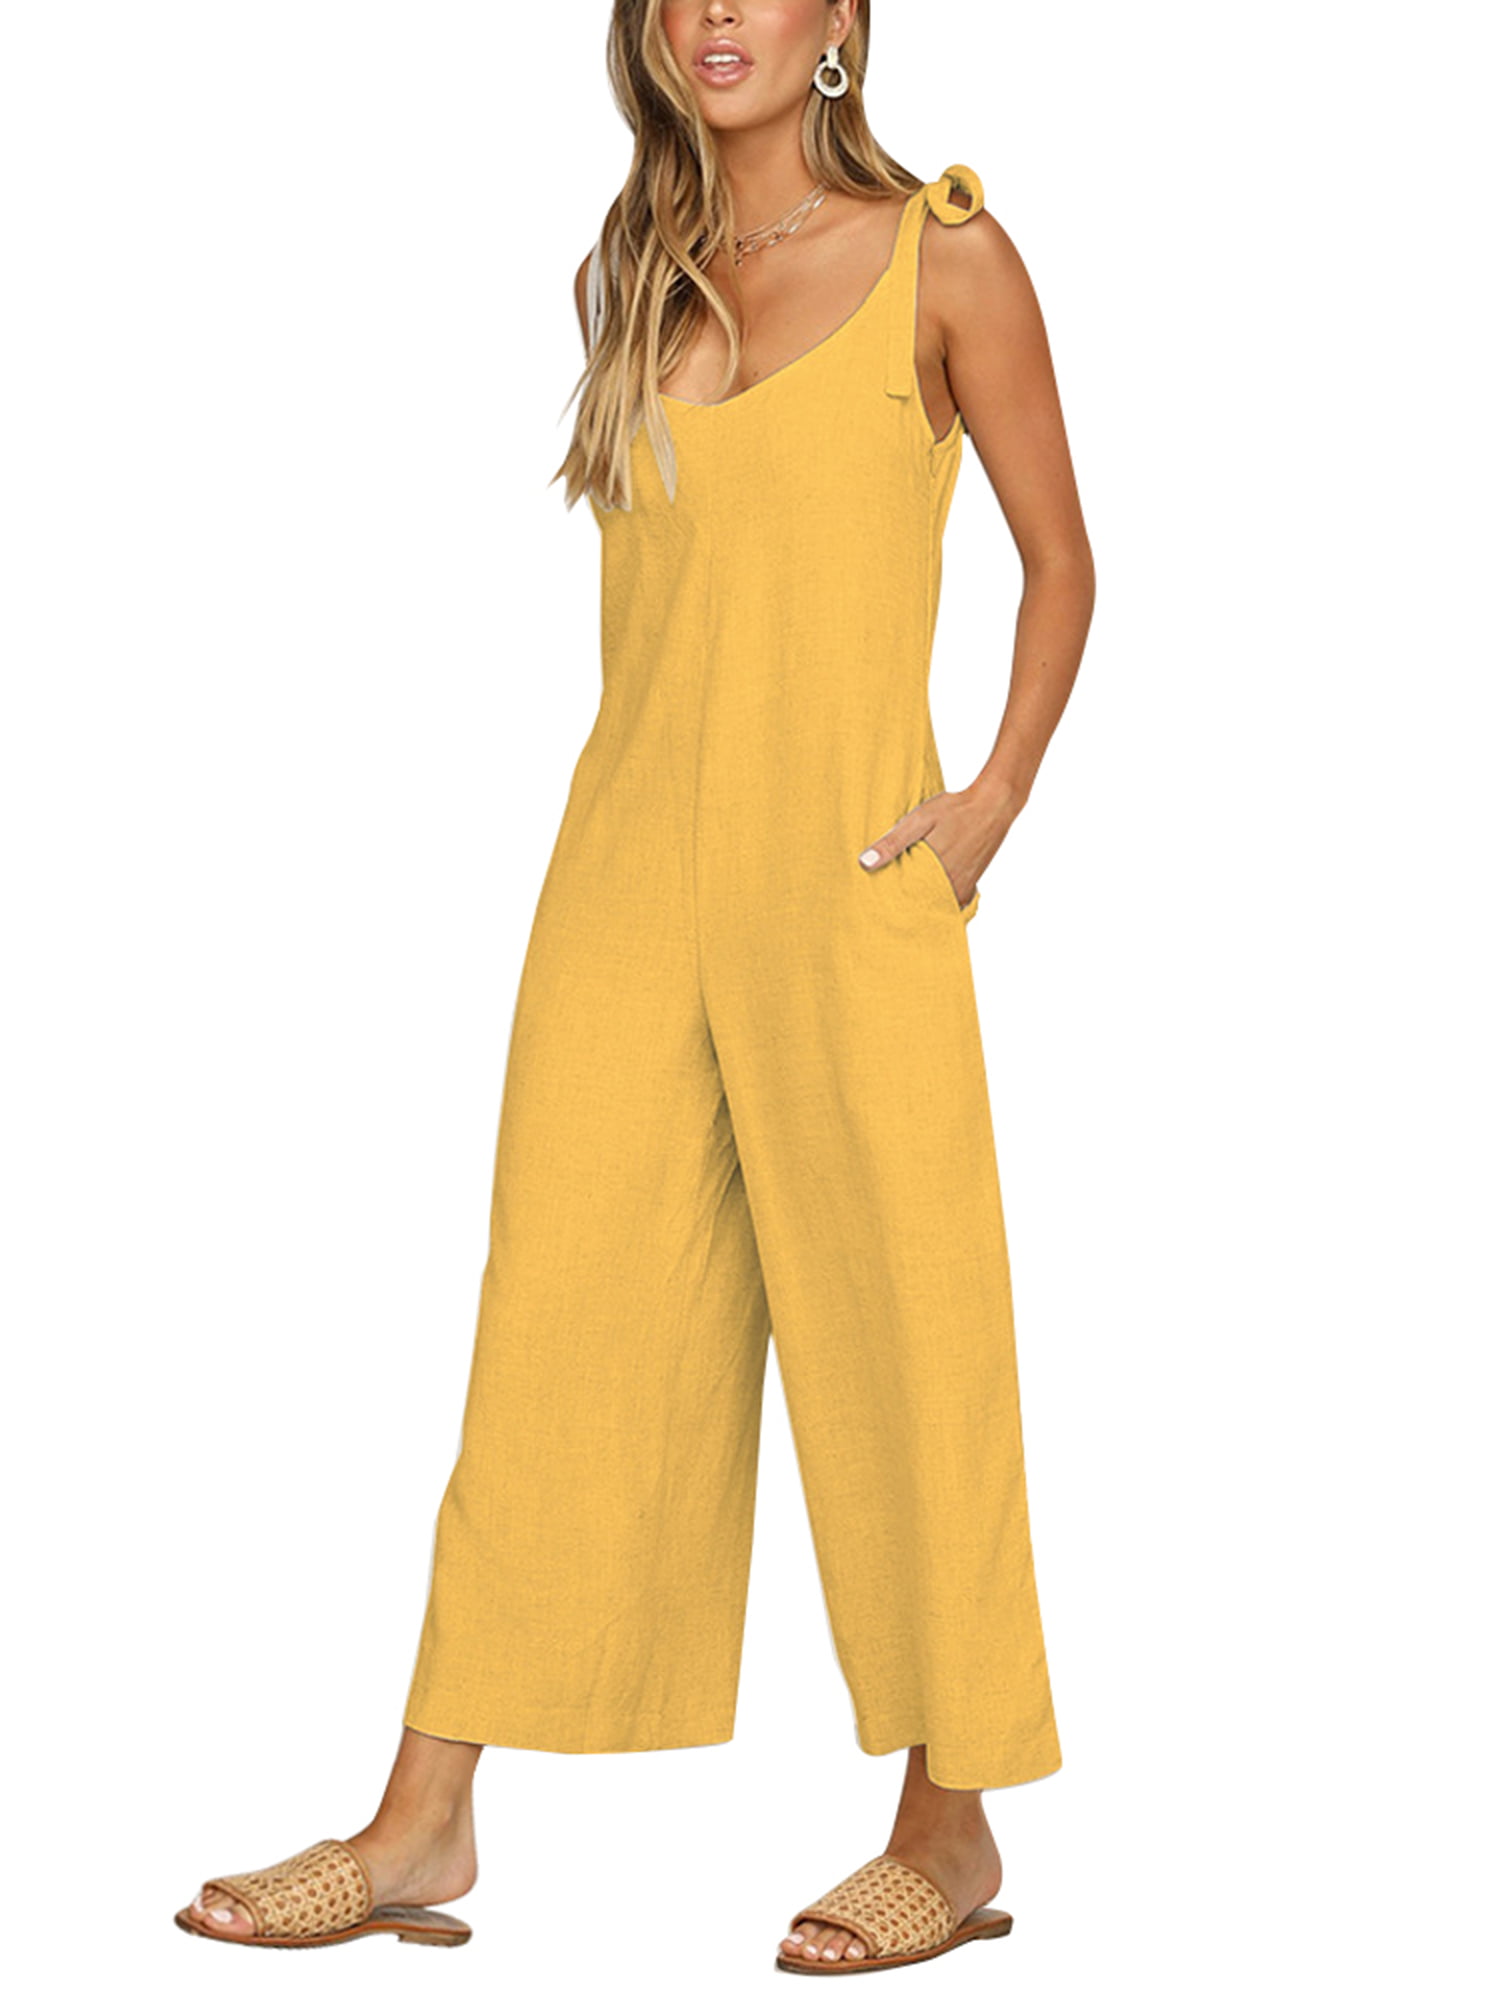 Women’s Summer Sleeveless Baggy Dungarees with Pockets Loose Playsuit Overalls Cotton Linen Strappy Jumpsuit Wide Leg Long Pants Women Summer Casual Outfits S-3XL 